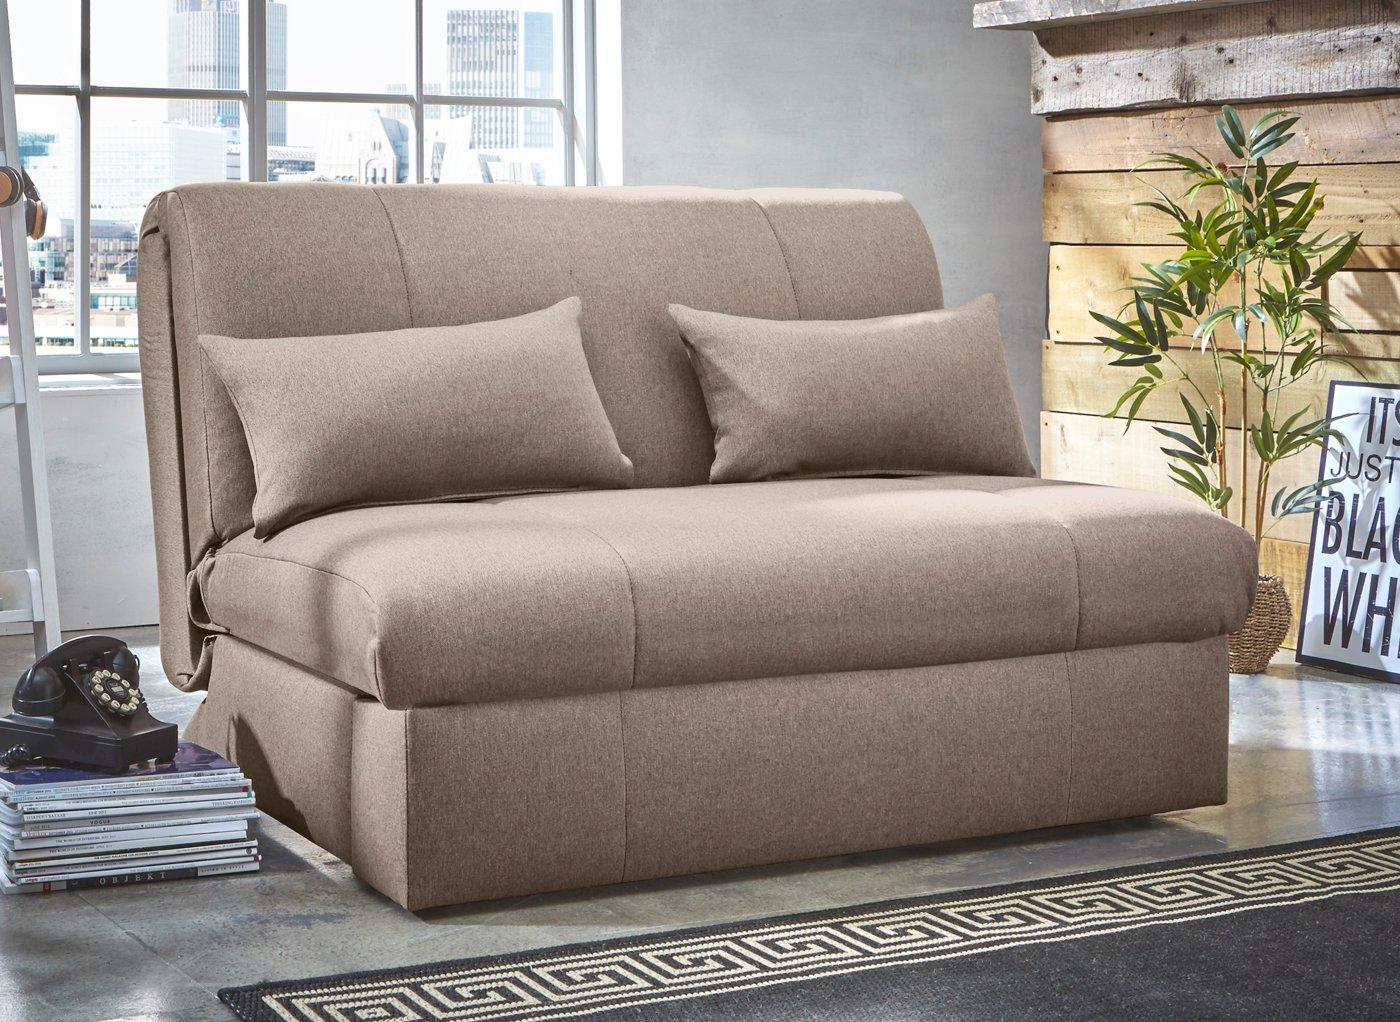 Things You Need To Understand Before Buying A Sectional Leather Sofa